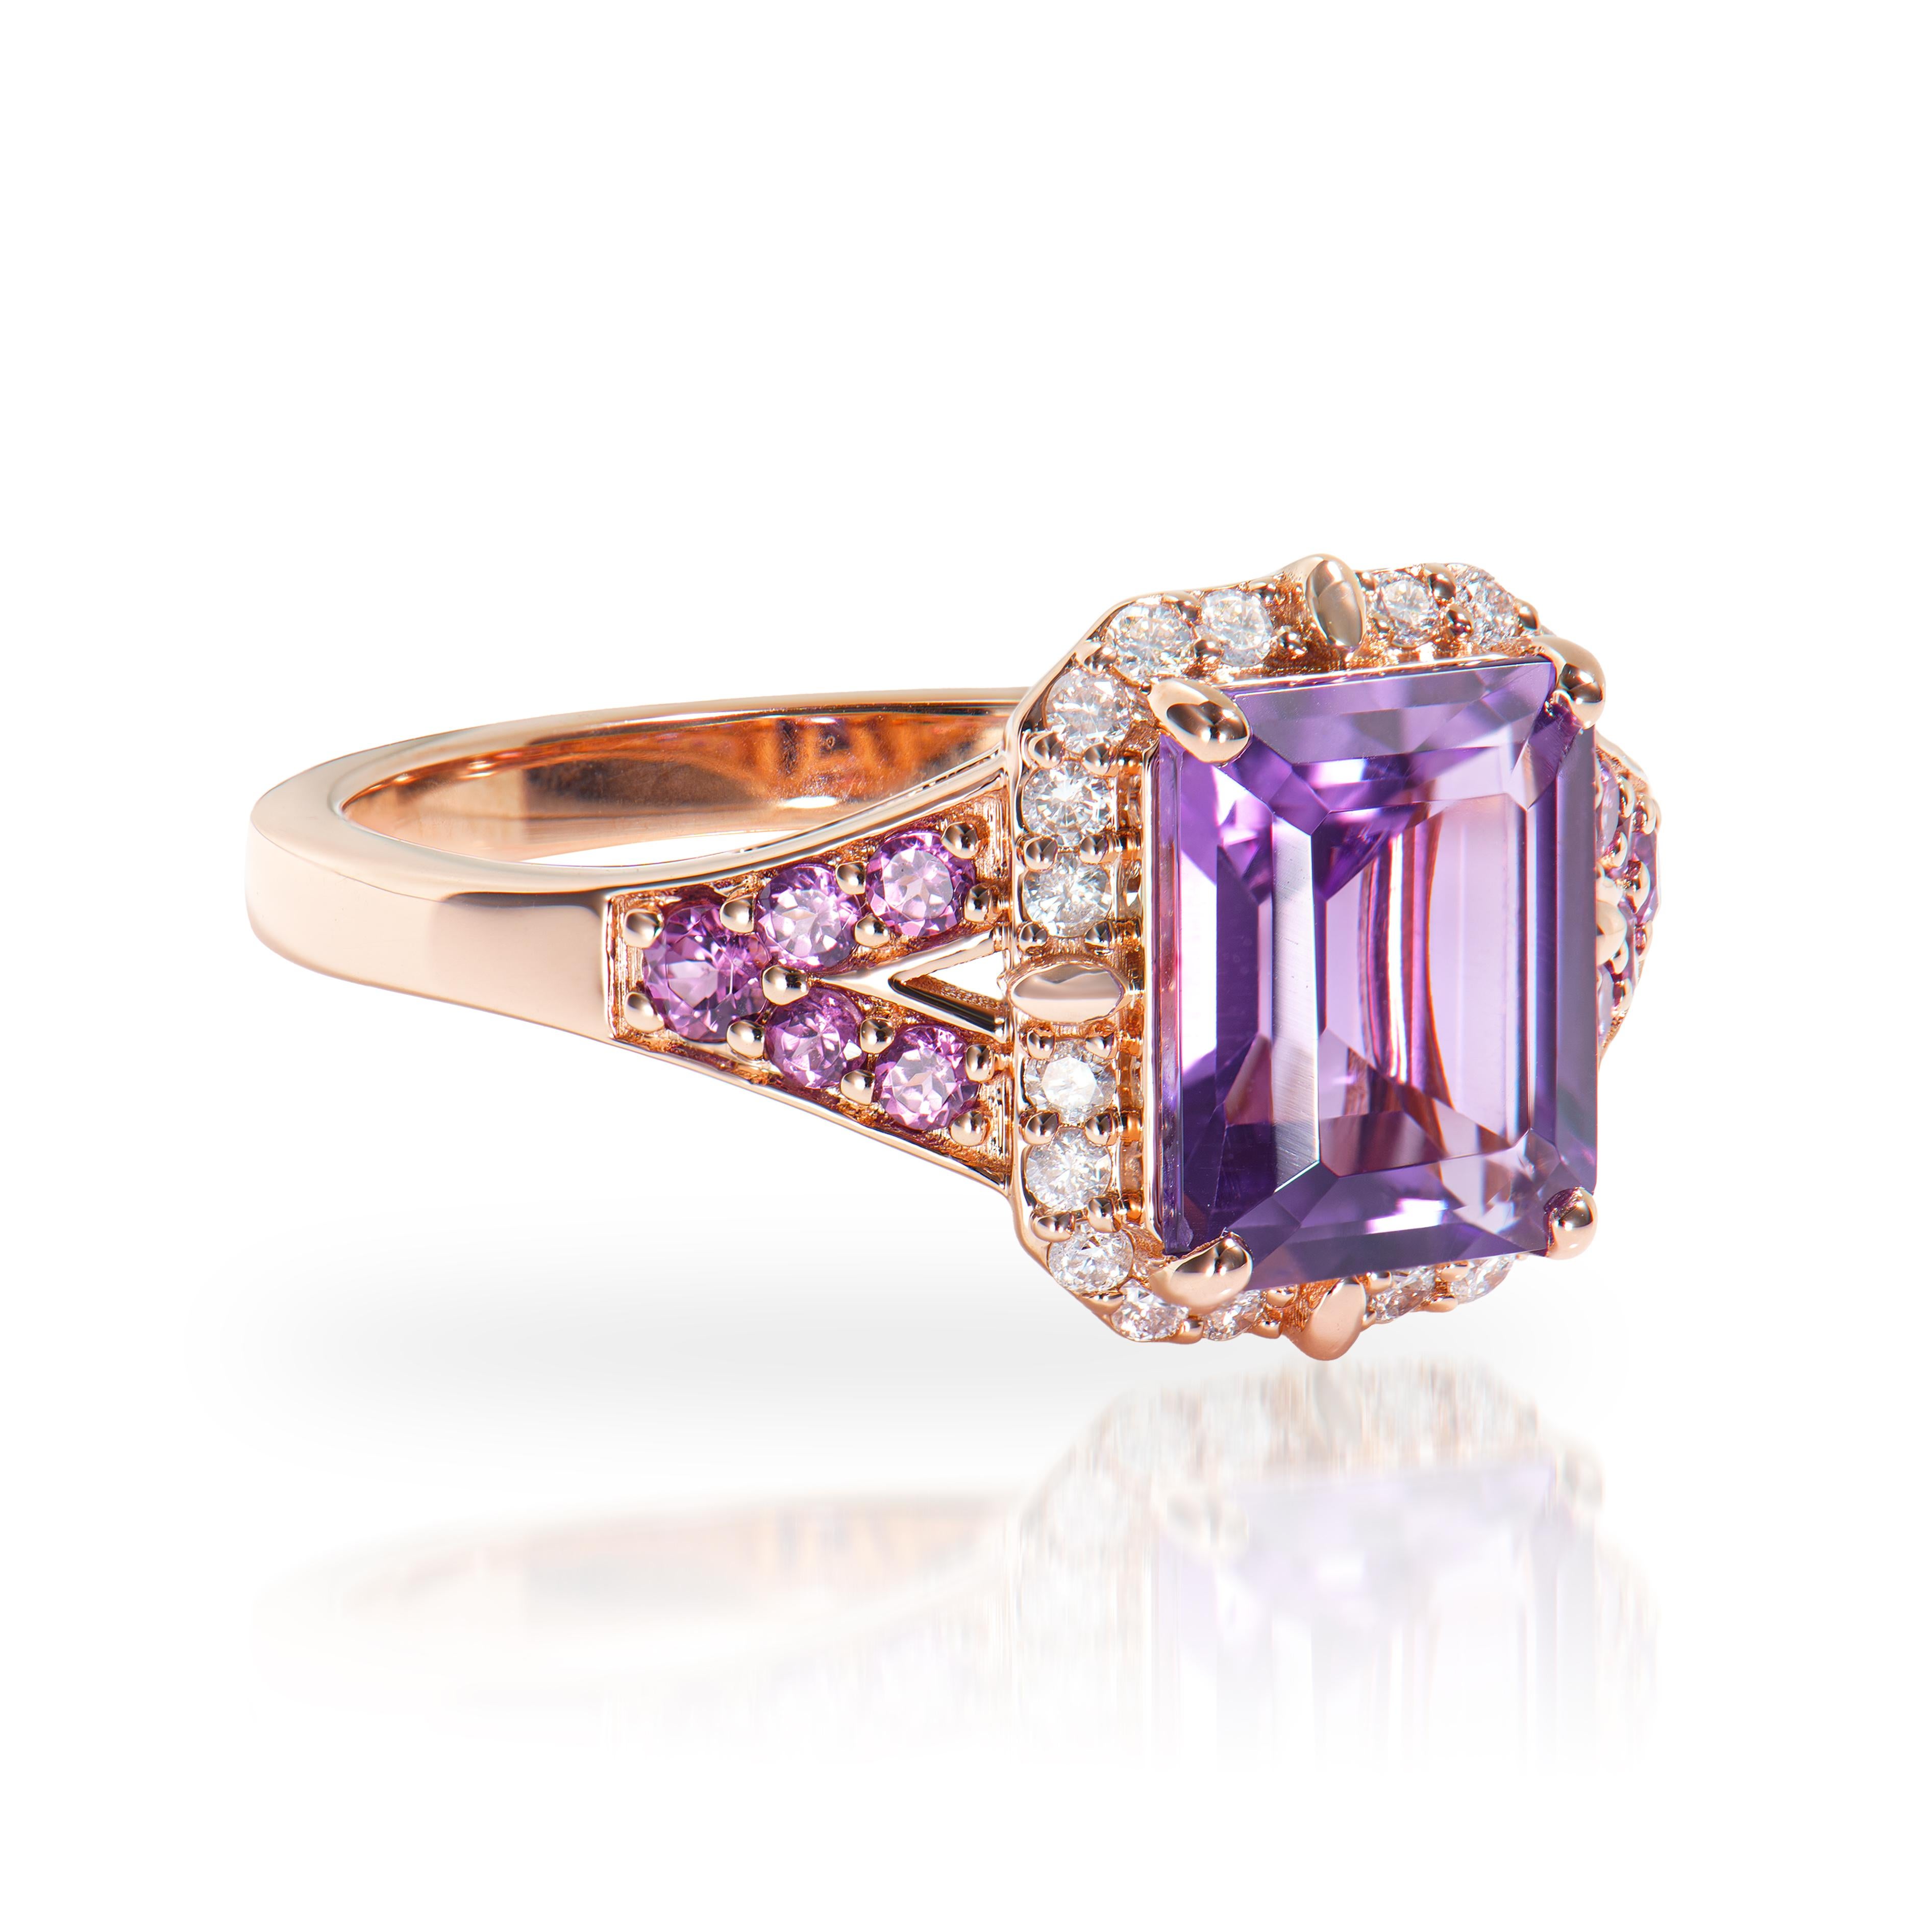 Presented A stunning variety of amethyst gemstones for those who respect quality and wish to wear them on any occasion or everyday basis. The rose gold amethyst fancy ring, embellished with diamonds, has a timeless and exquisite appeal.

Amethyst